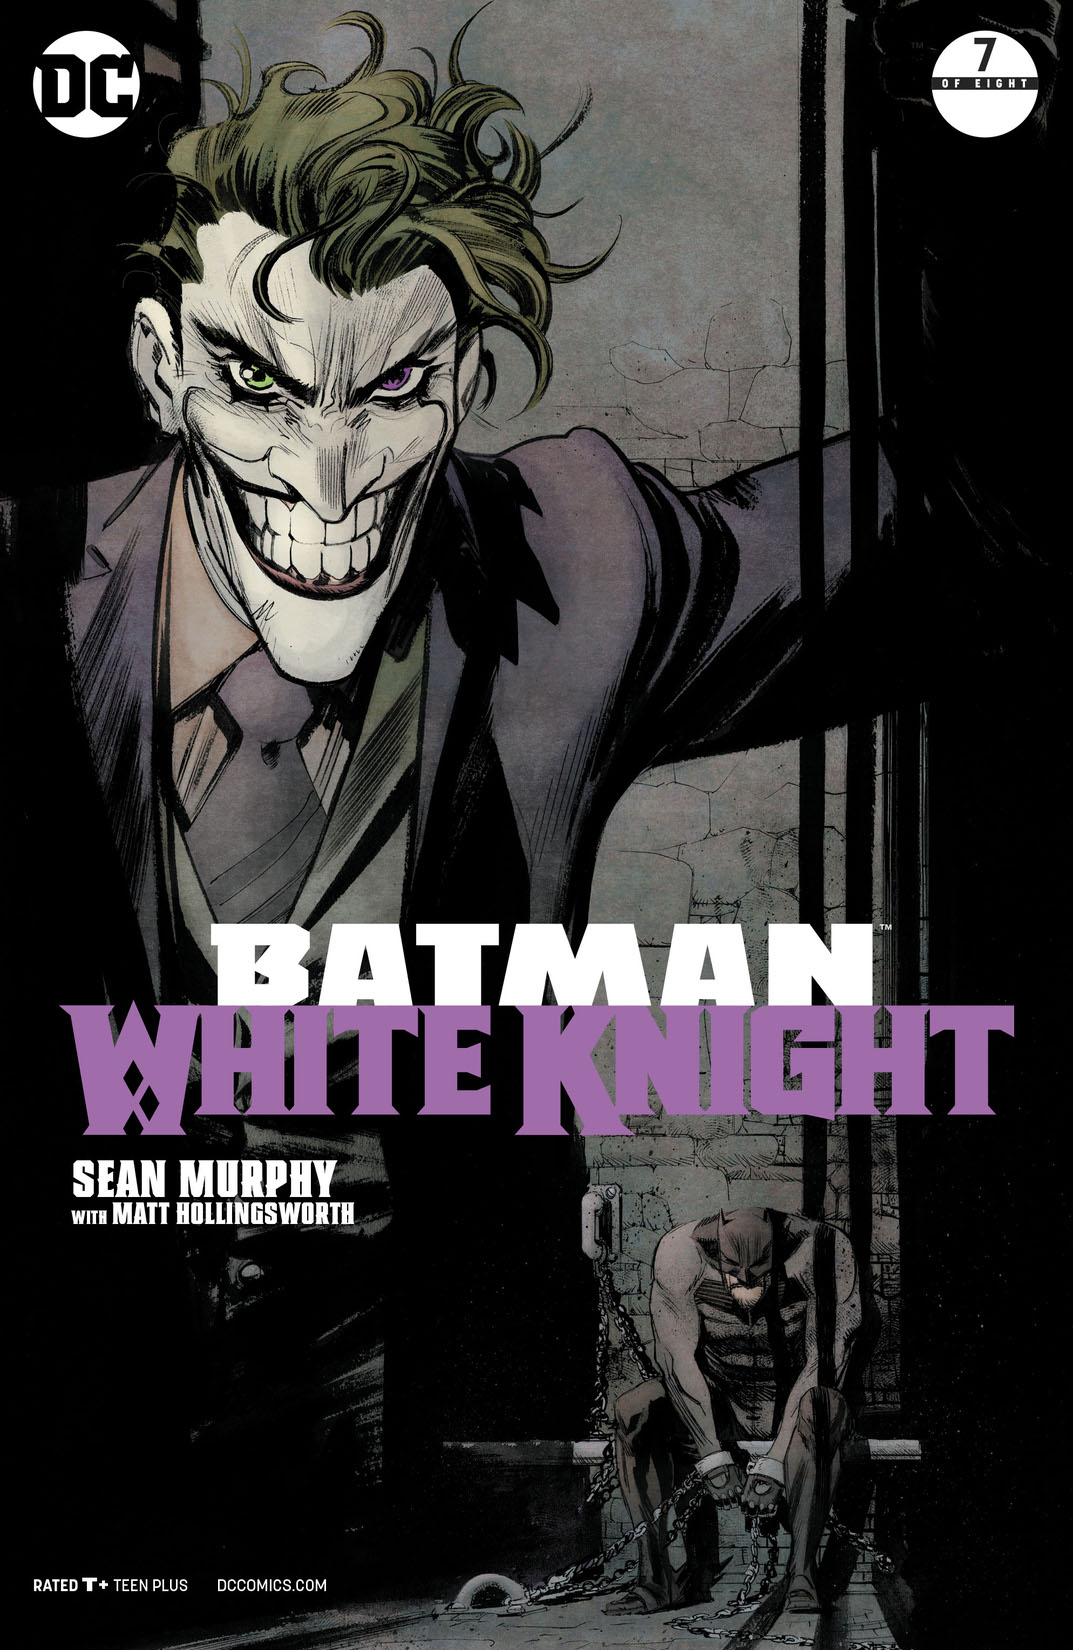 Batman: White Knight #7 preview images